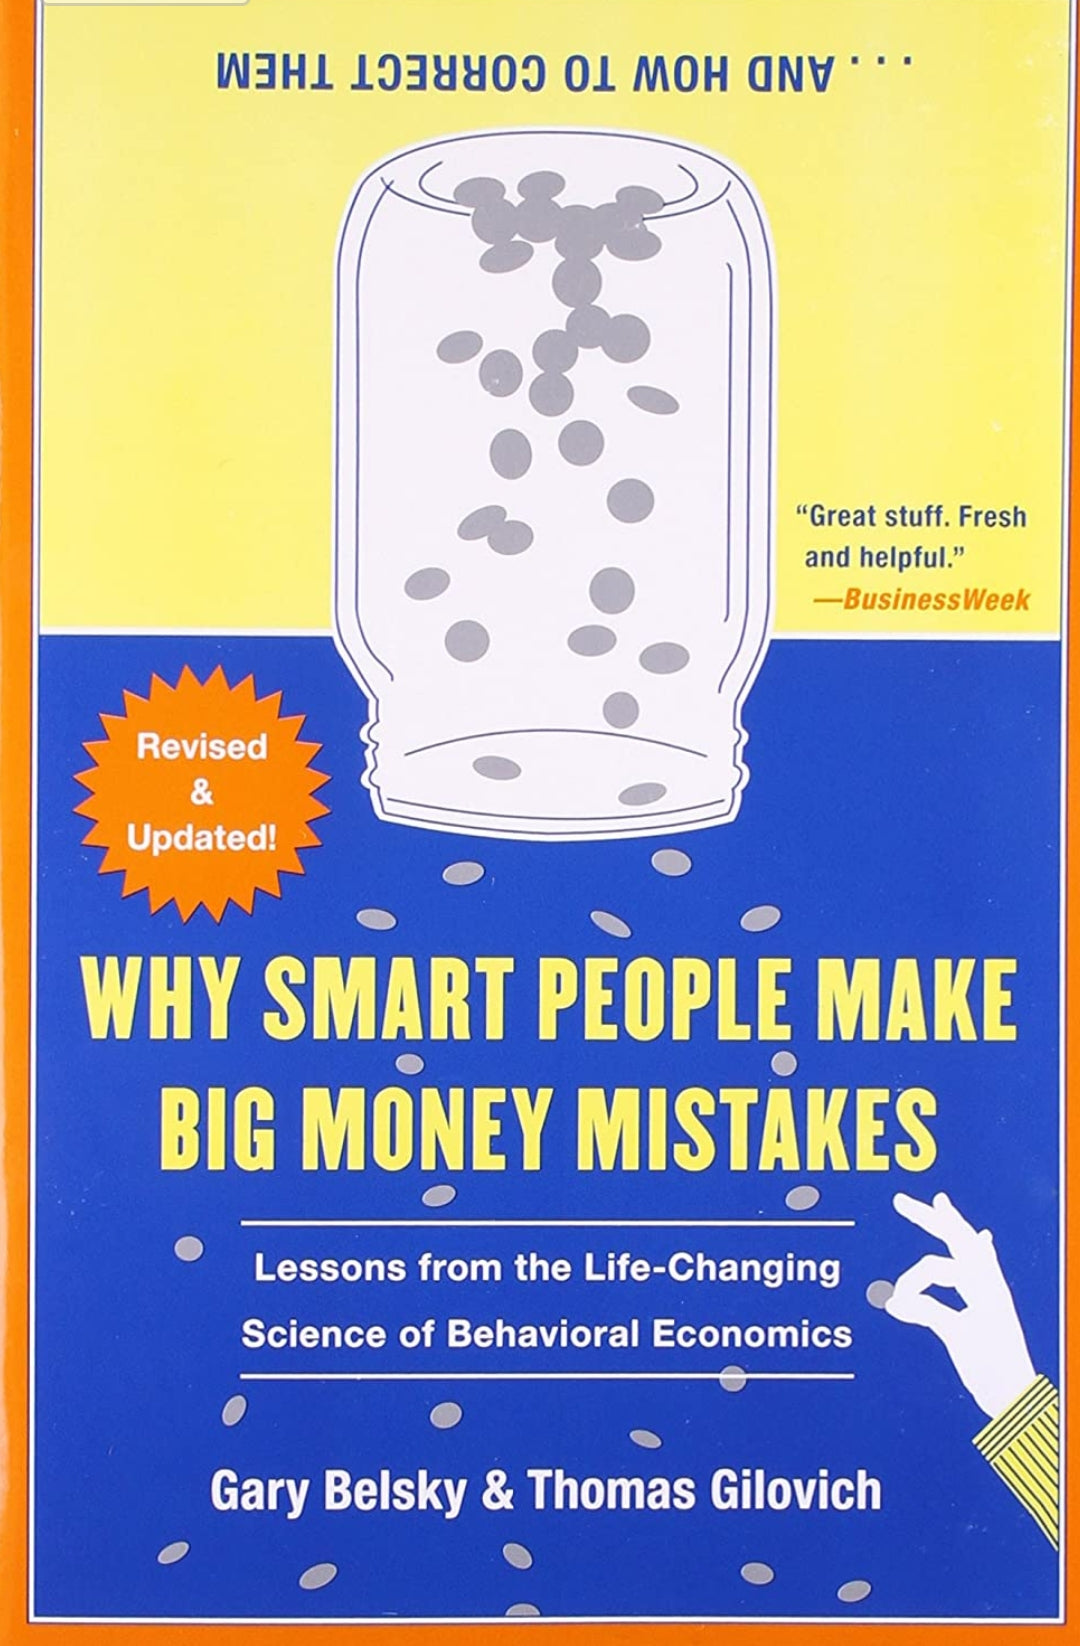 Why Smart People Make Big Money Mistakes And How To Correct Them: Lessons From The New Science Of Behavioral Economics by Gary Belsky